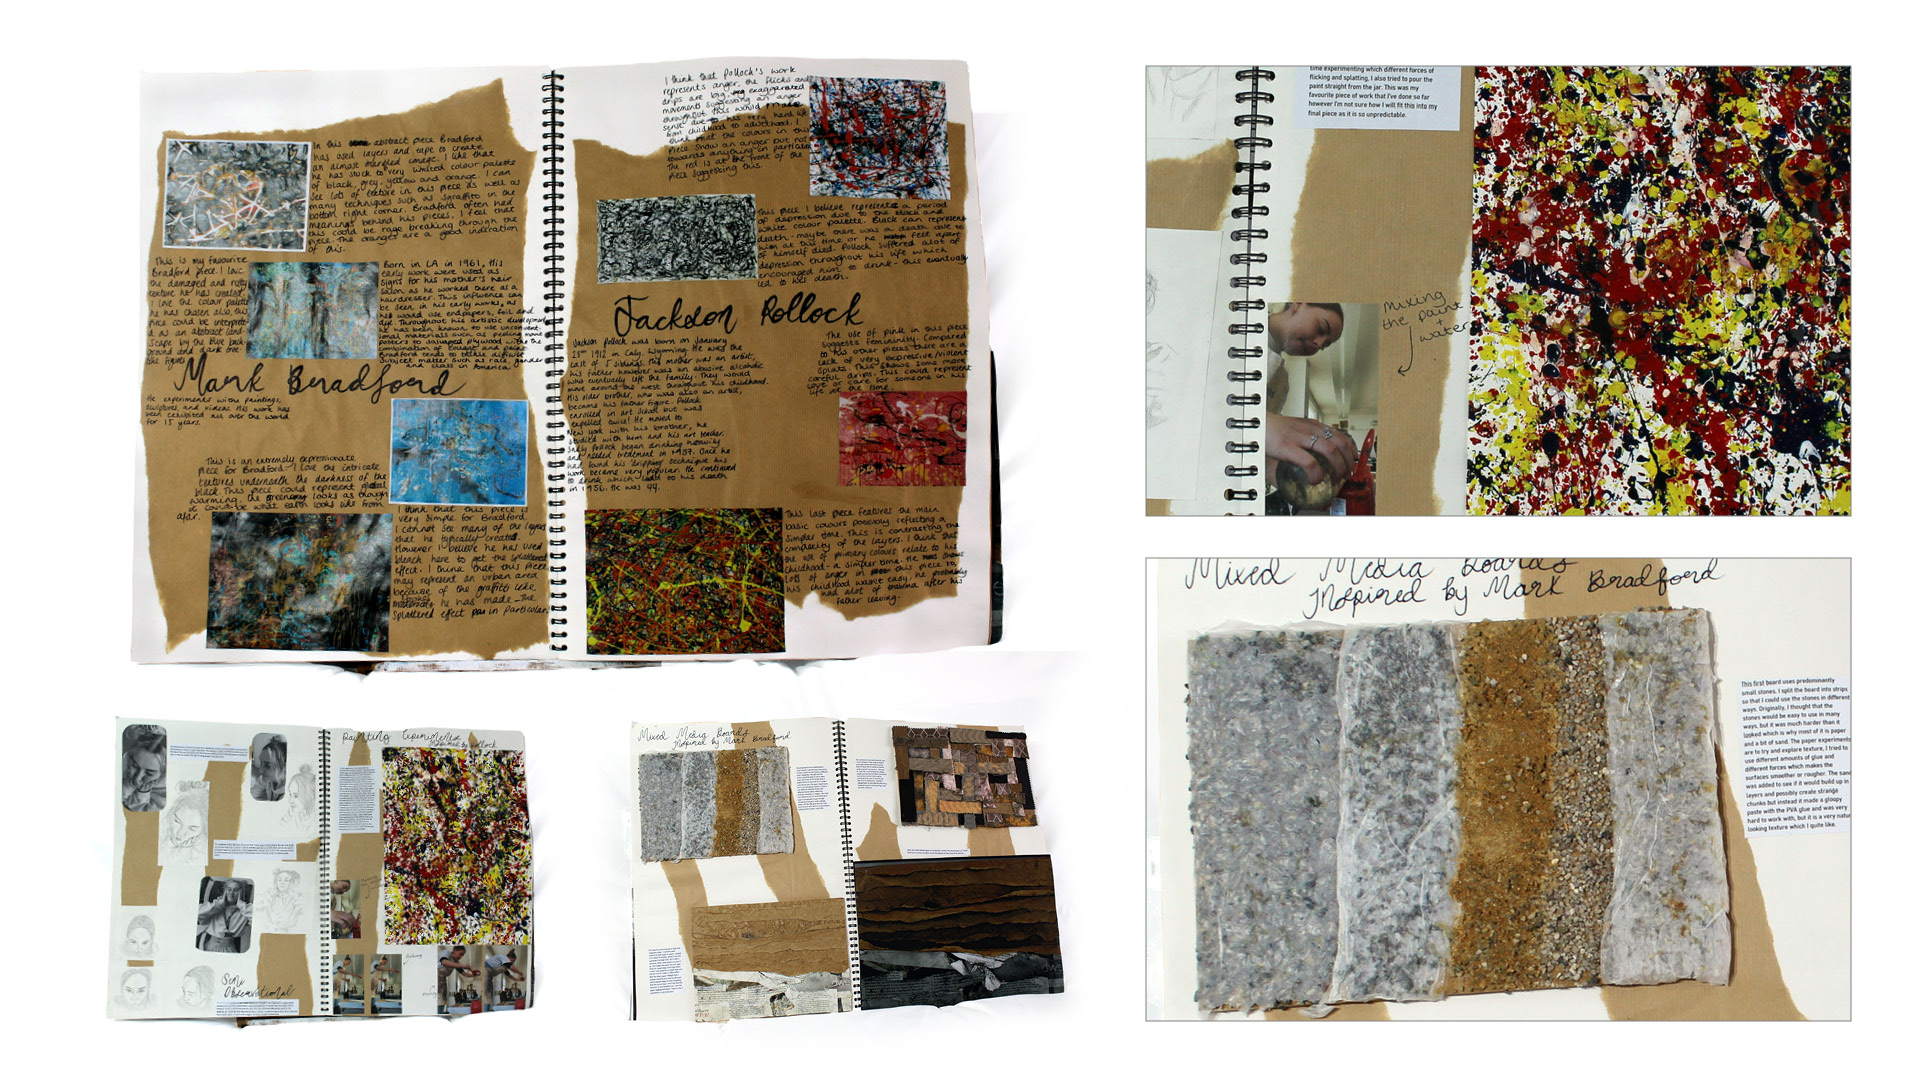 CSM Portfolio P4: From above project - Investigation into relevant and inspiring artists such as Jackson Pollock and Mark Bradford, as part of the initial phases of a project based on the theme "From above".